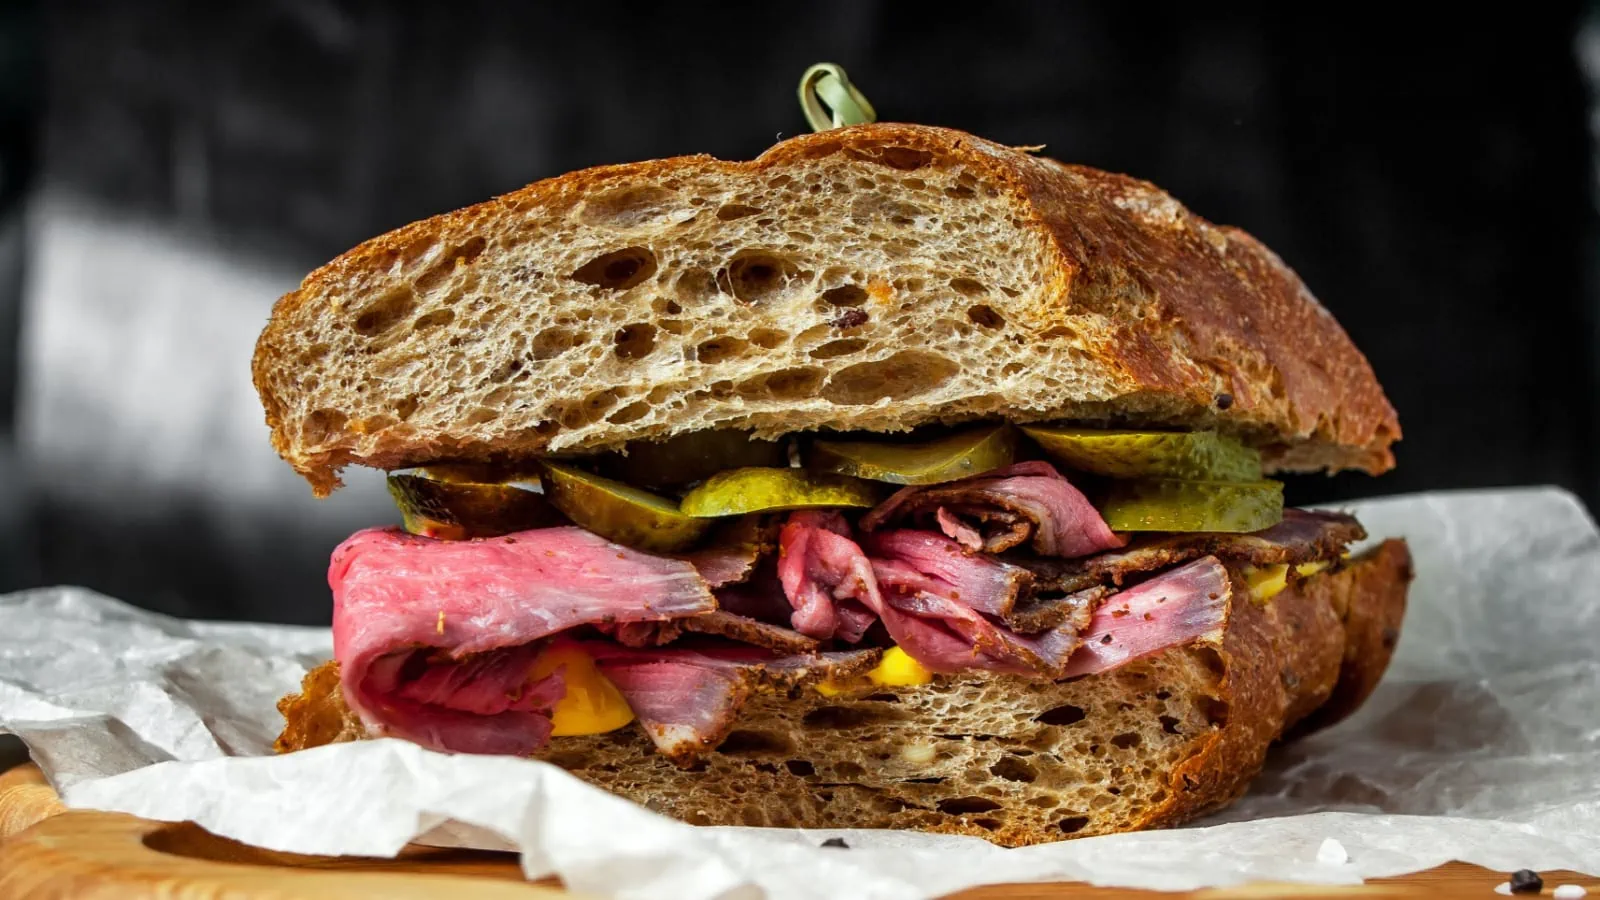 Pastrami with rye bread